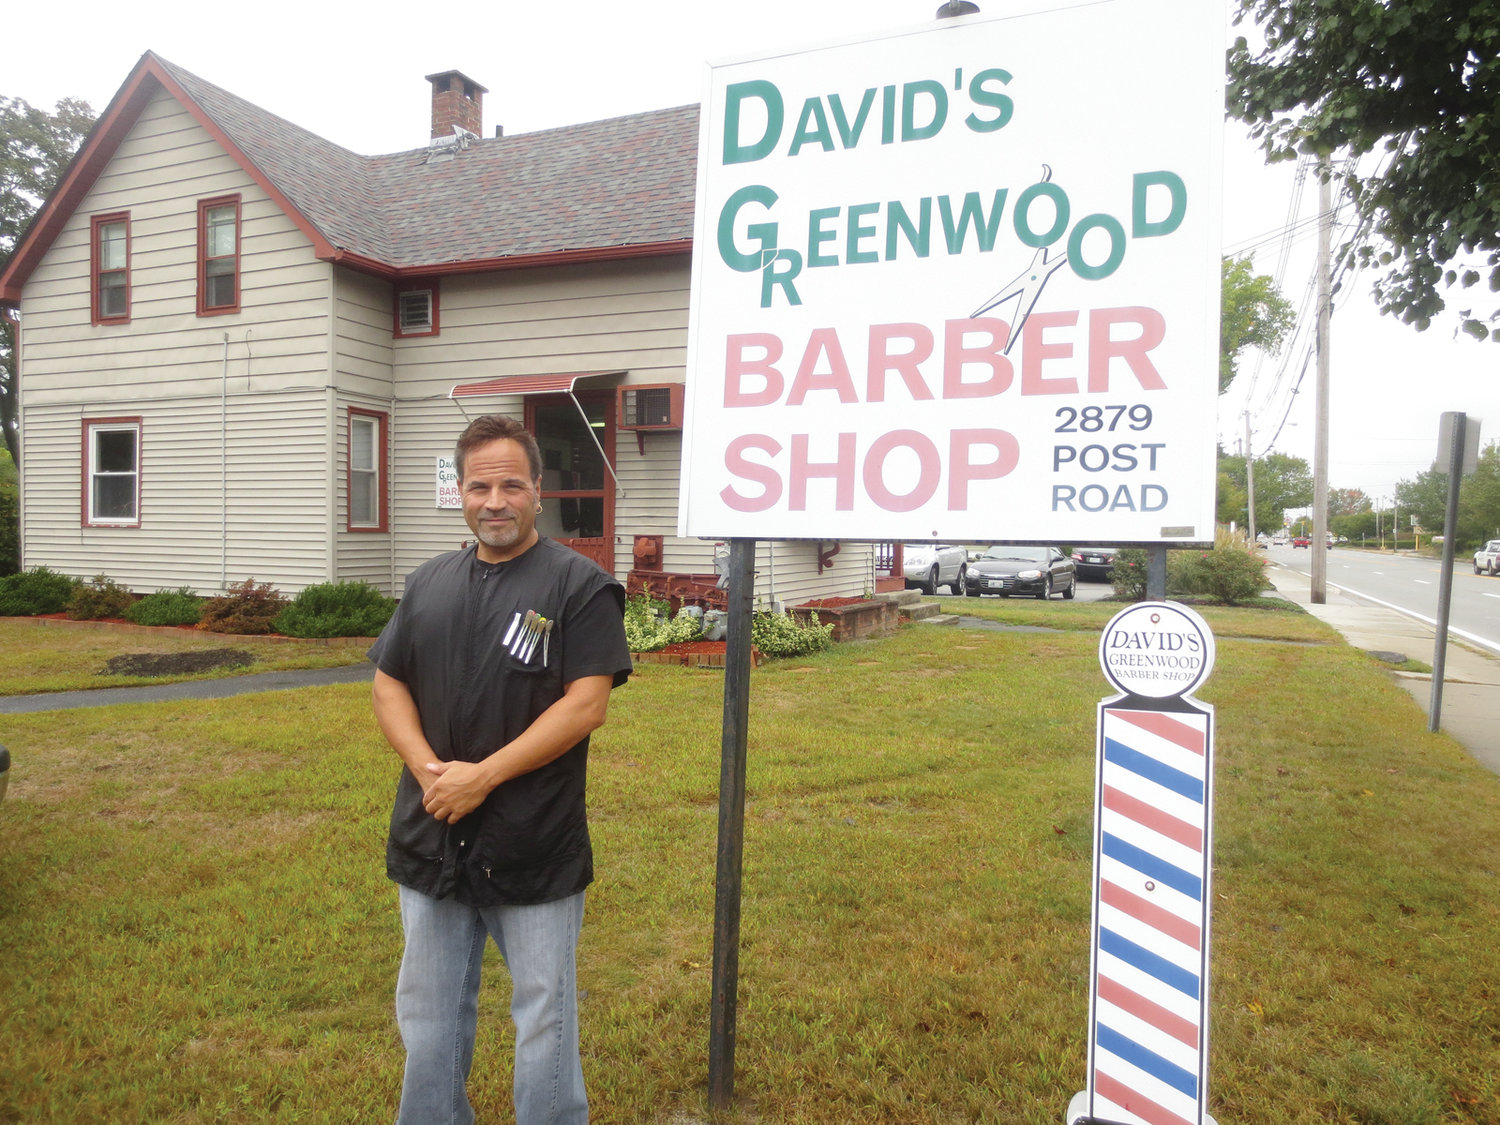 Meet Dave Picozzi, the namesake of David’s Greenwood Barber Shop on Post Road in Warwick. Just walk in for a spin in the chair of this longtime barber or his talented son Geno, no appointment needed.